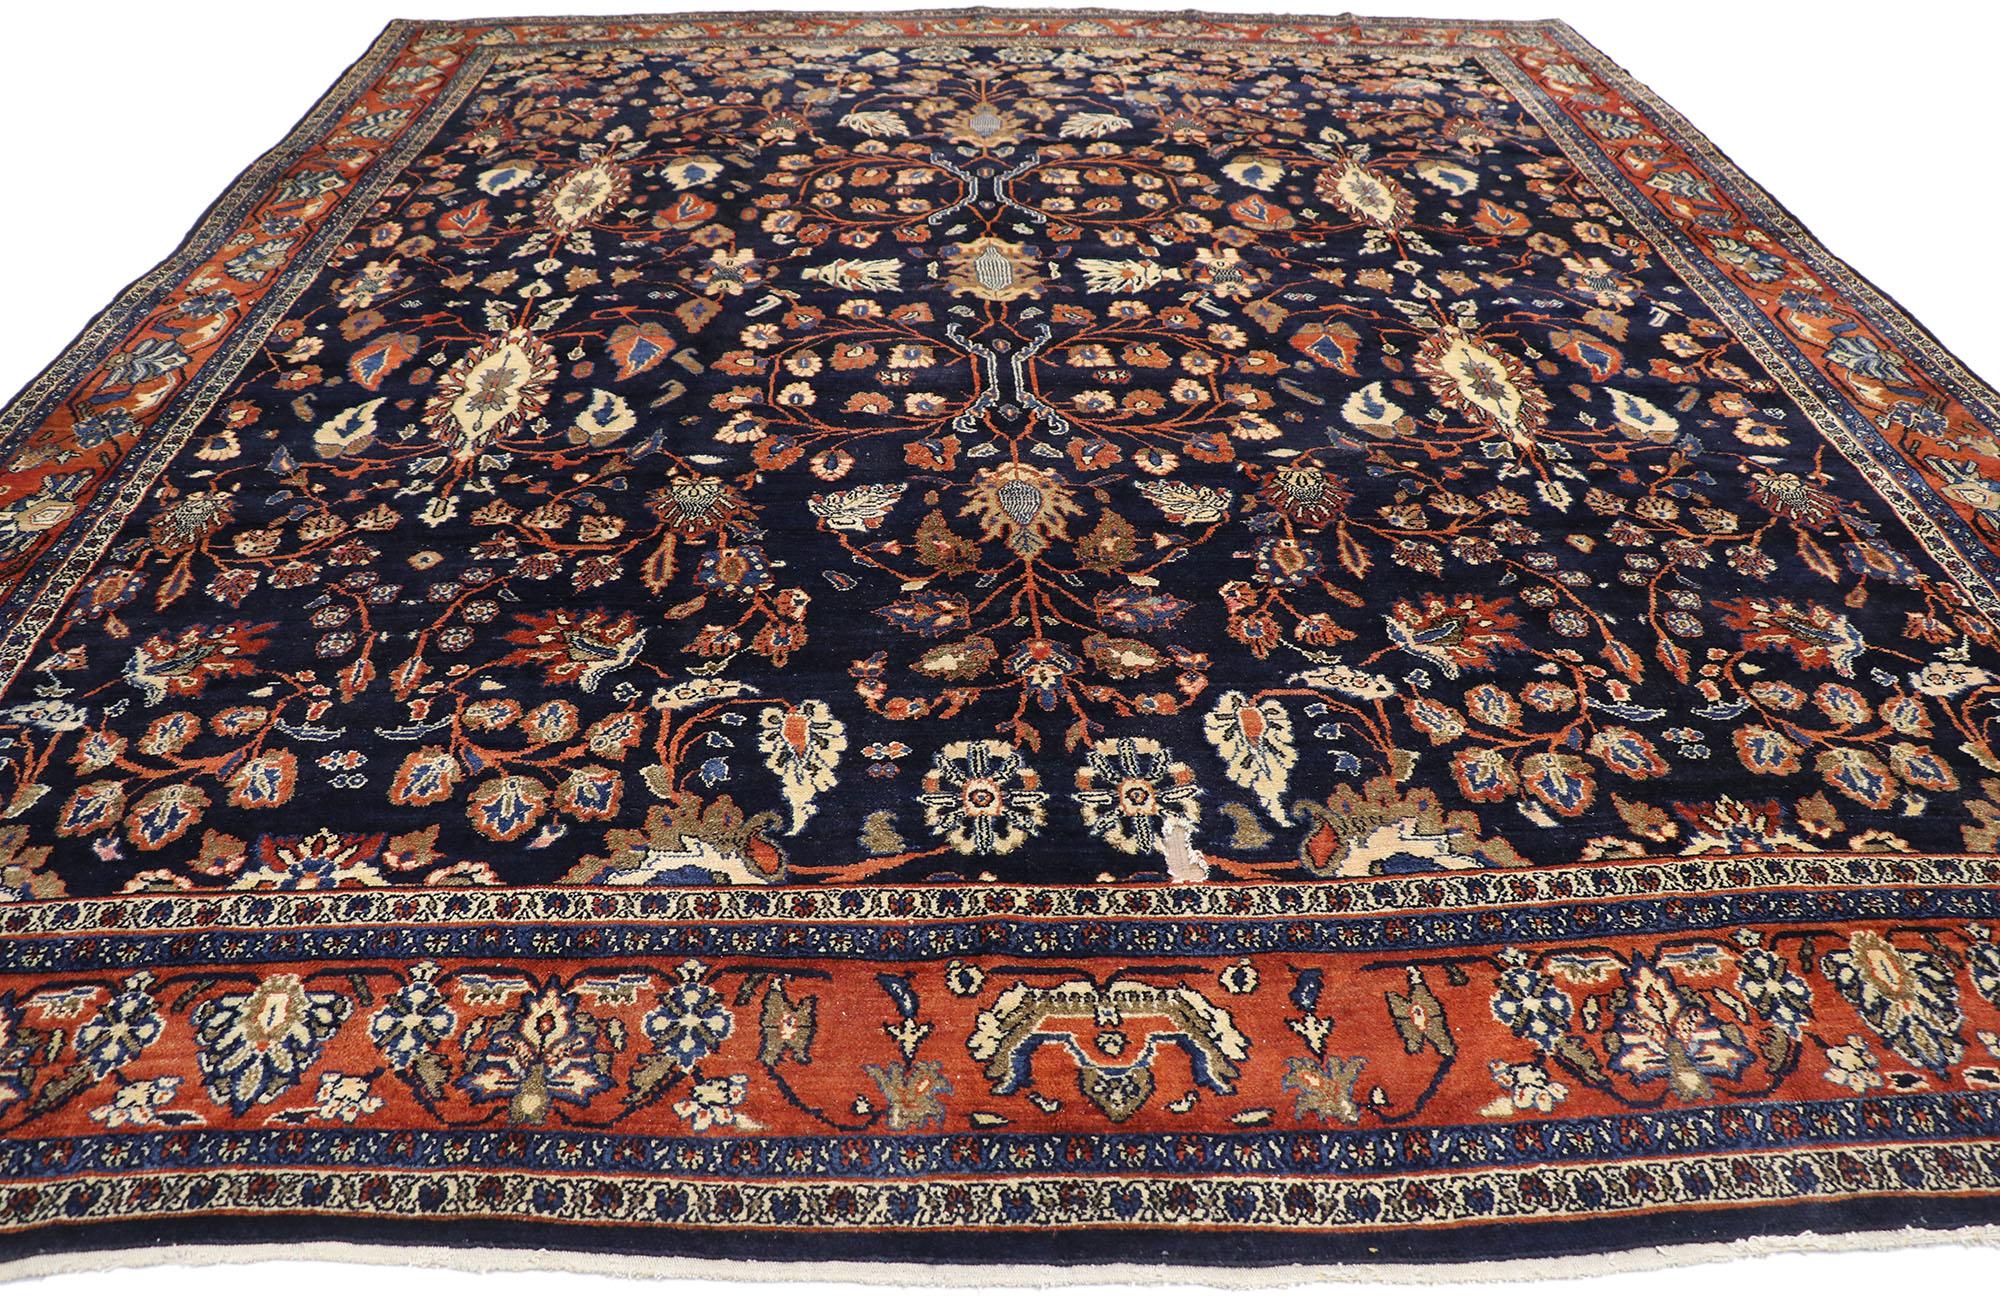 scatter rugs meaning